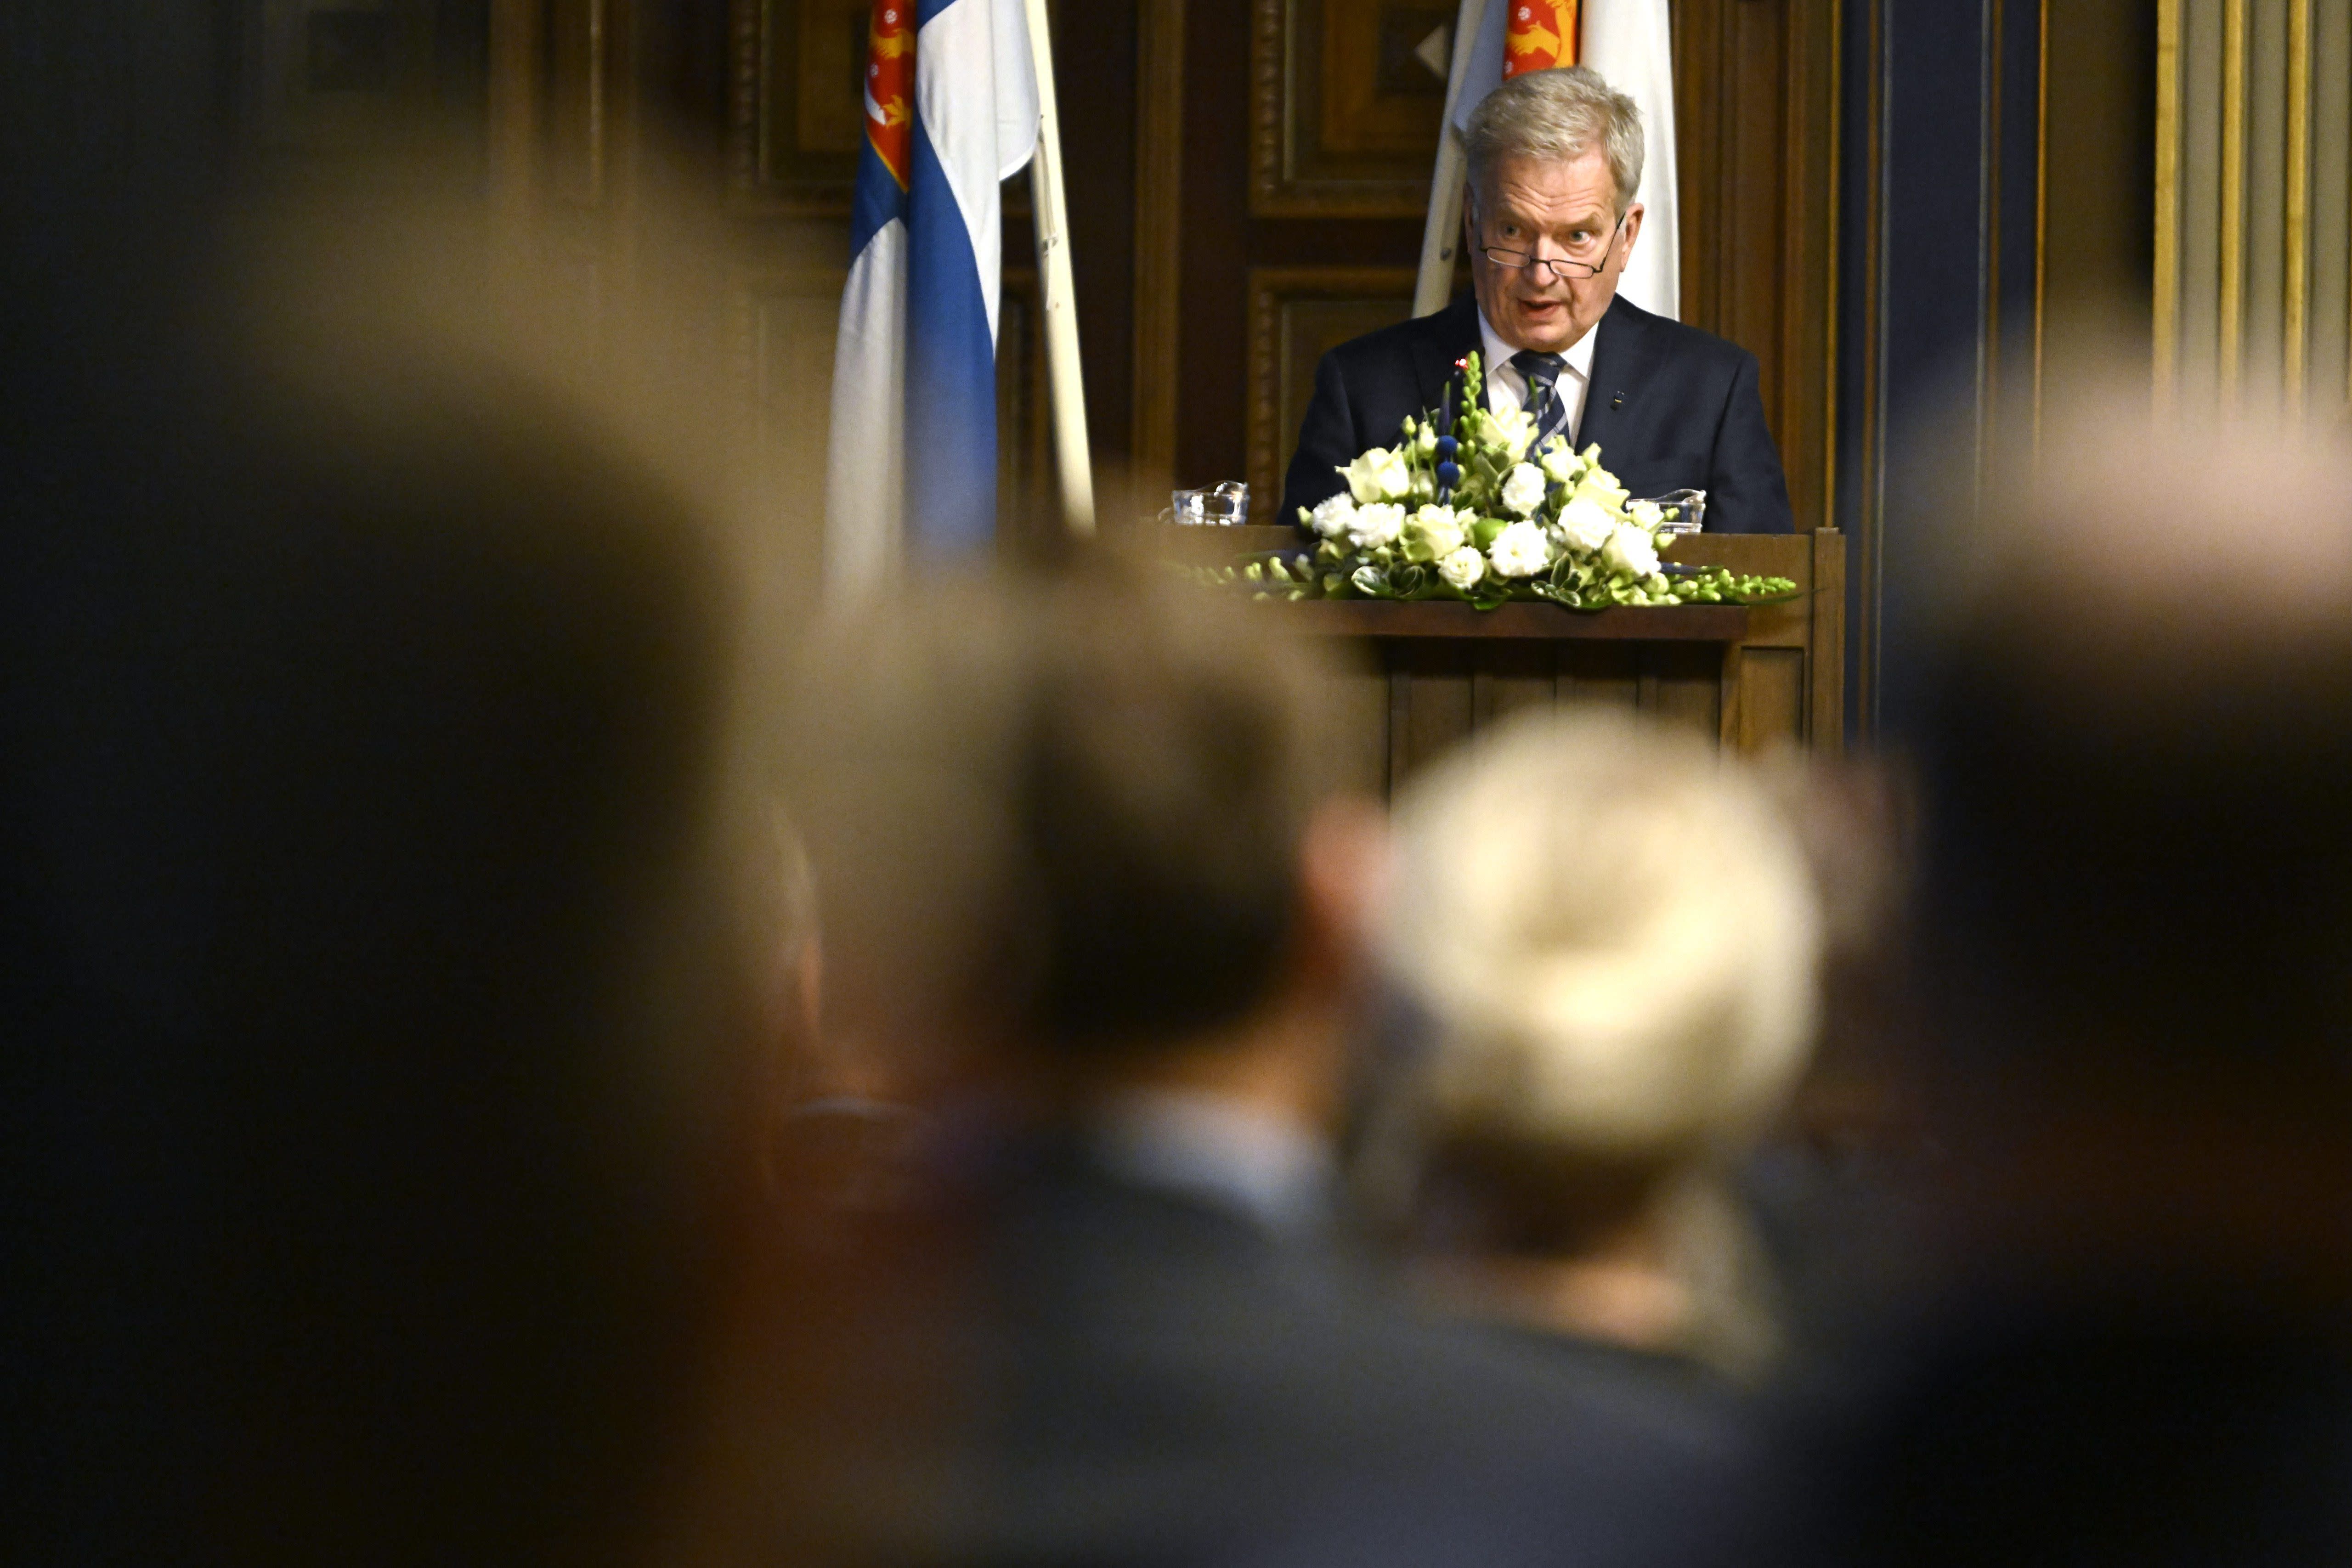 President Niinistö: Finland has no intention of placing nuclear weapons on its territory